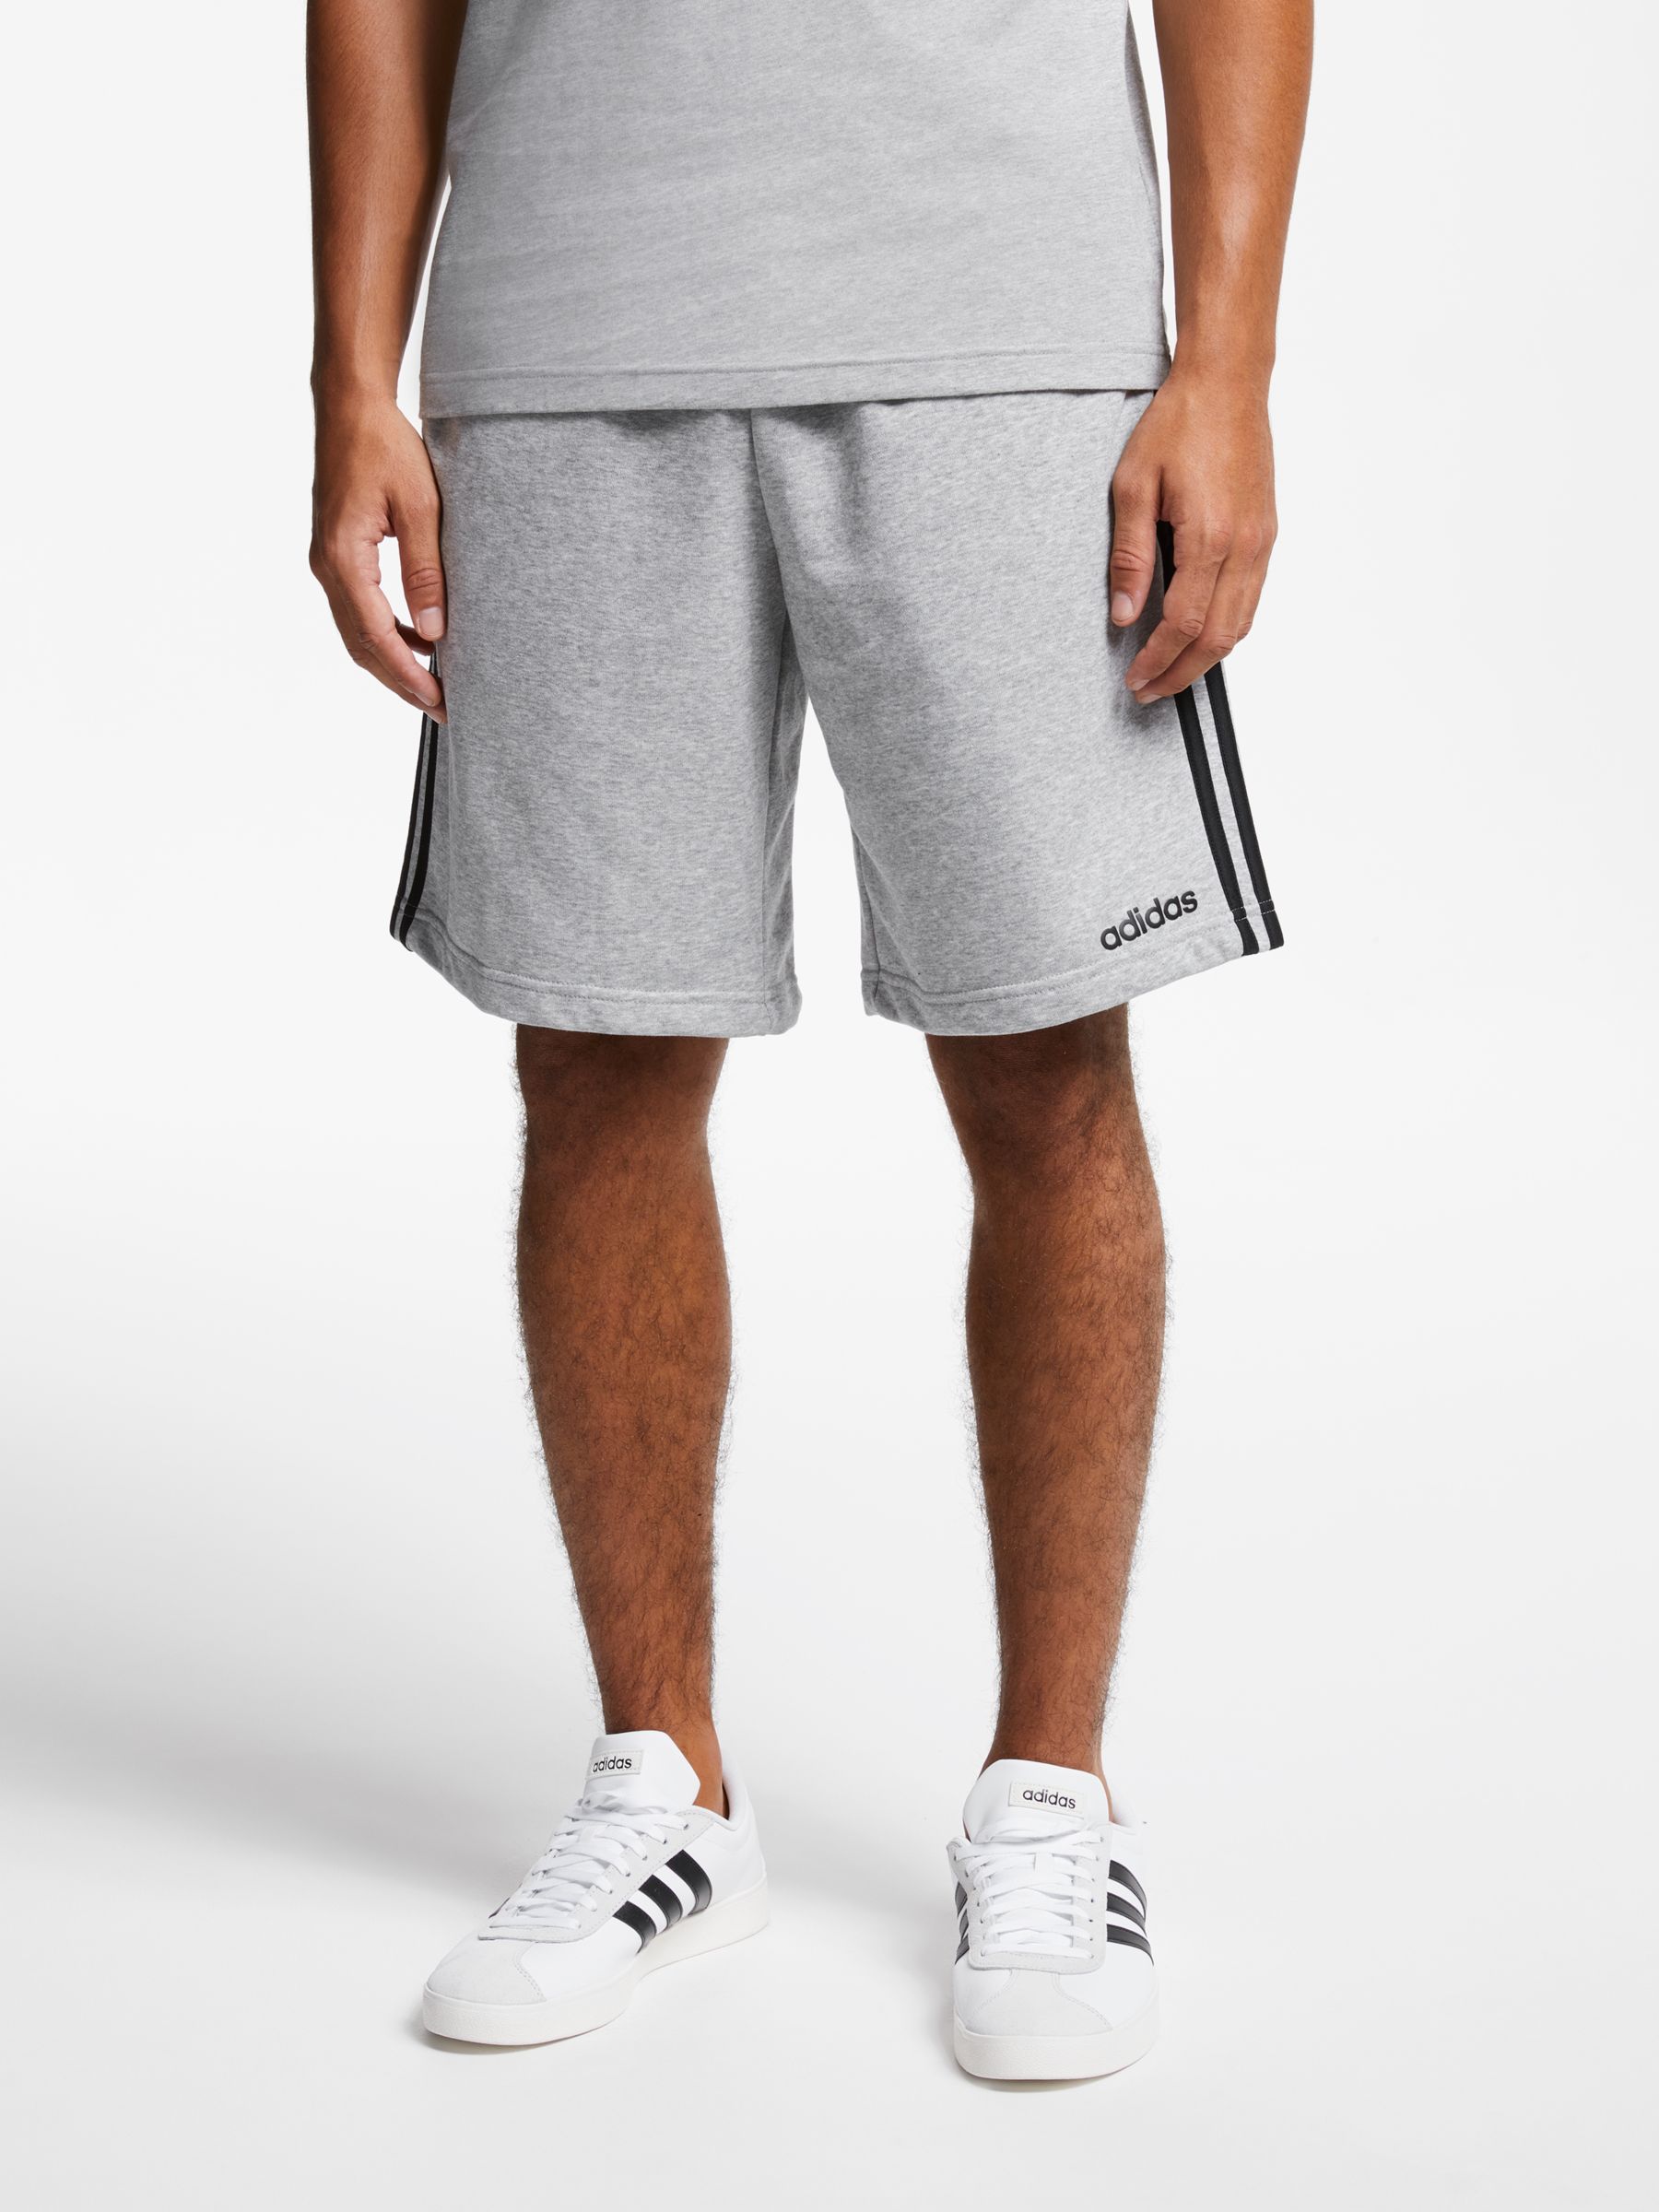 adidas french terry shorts